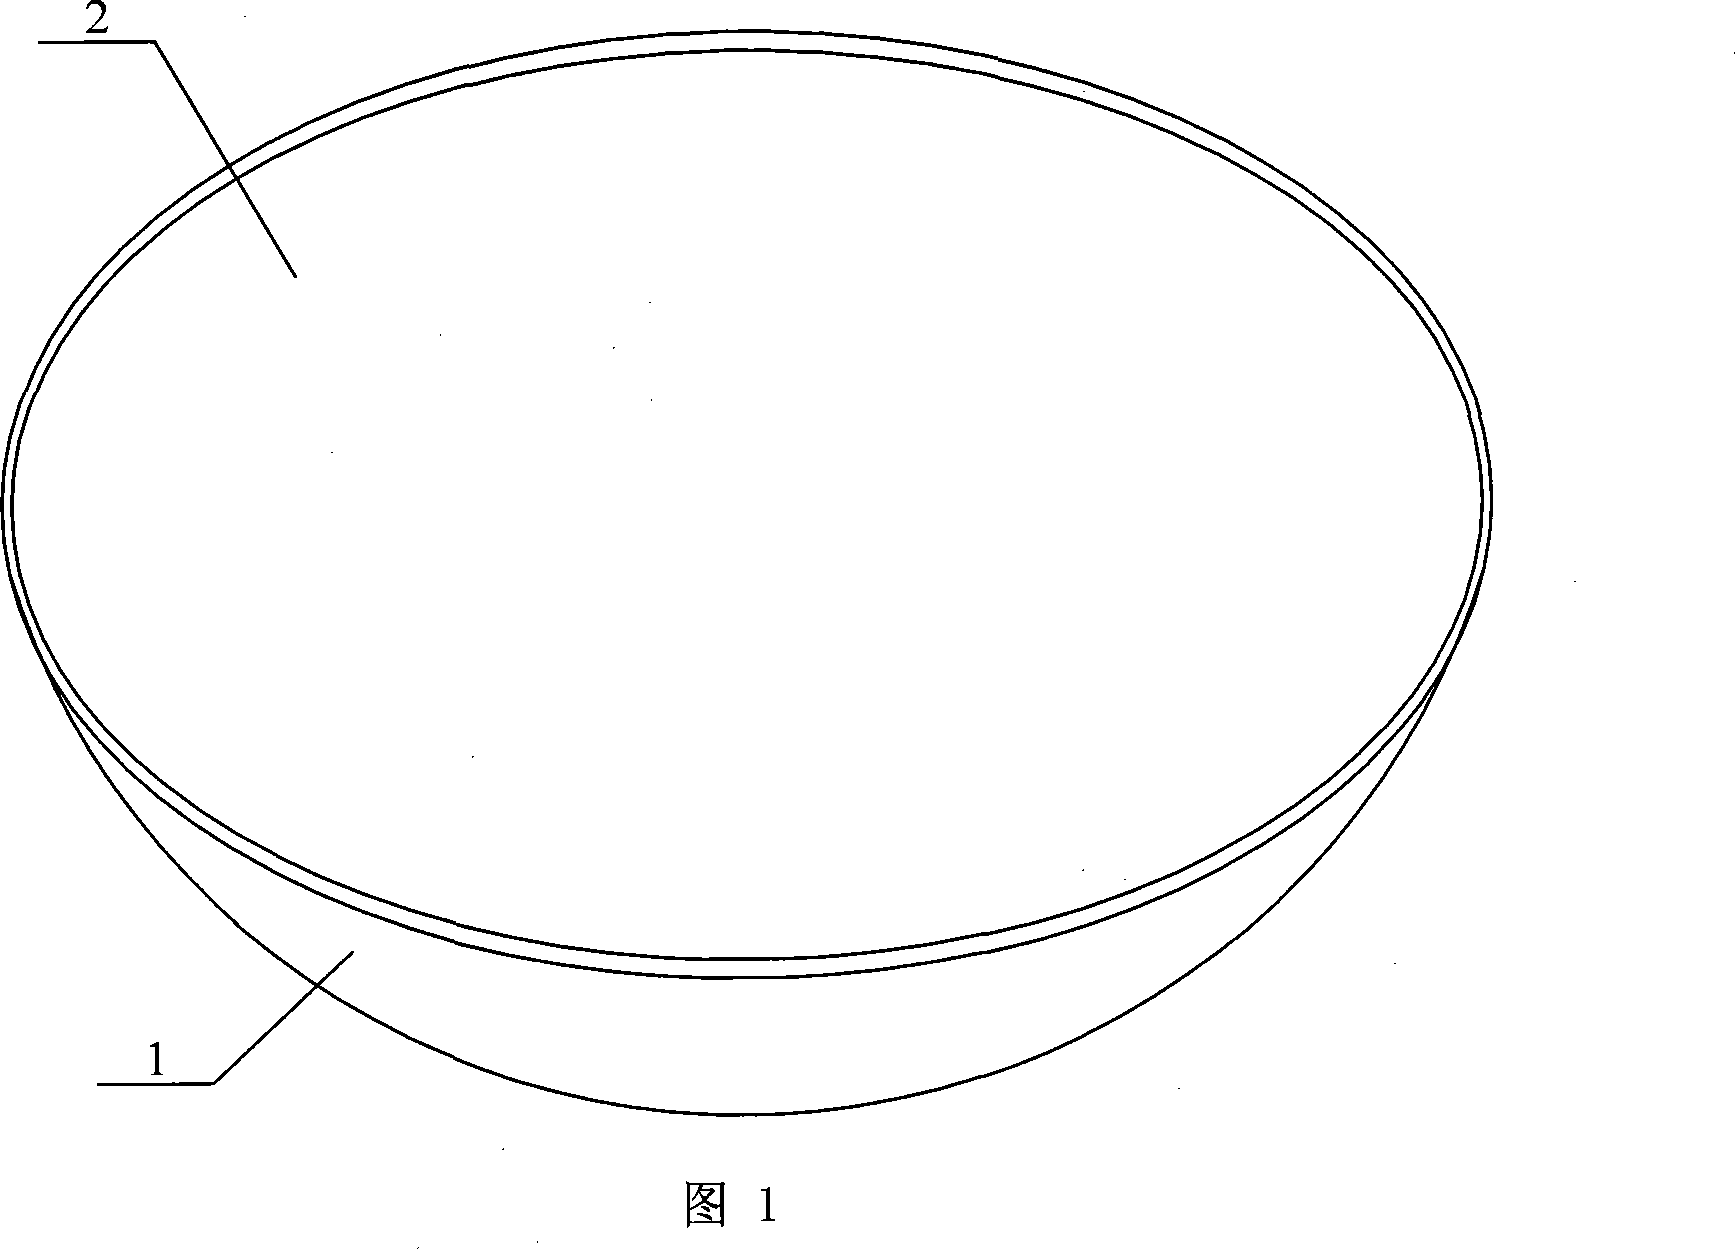 Extensible mirror body with shape memory material lining substrate